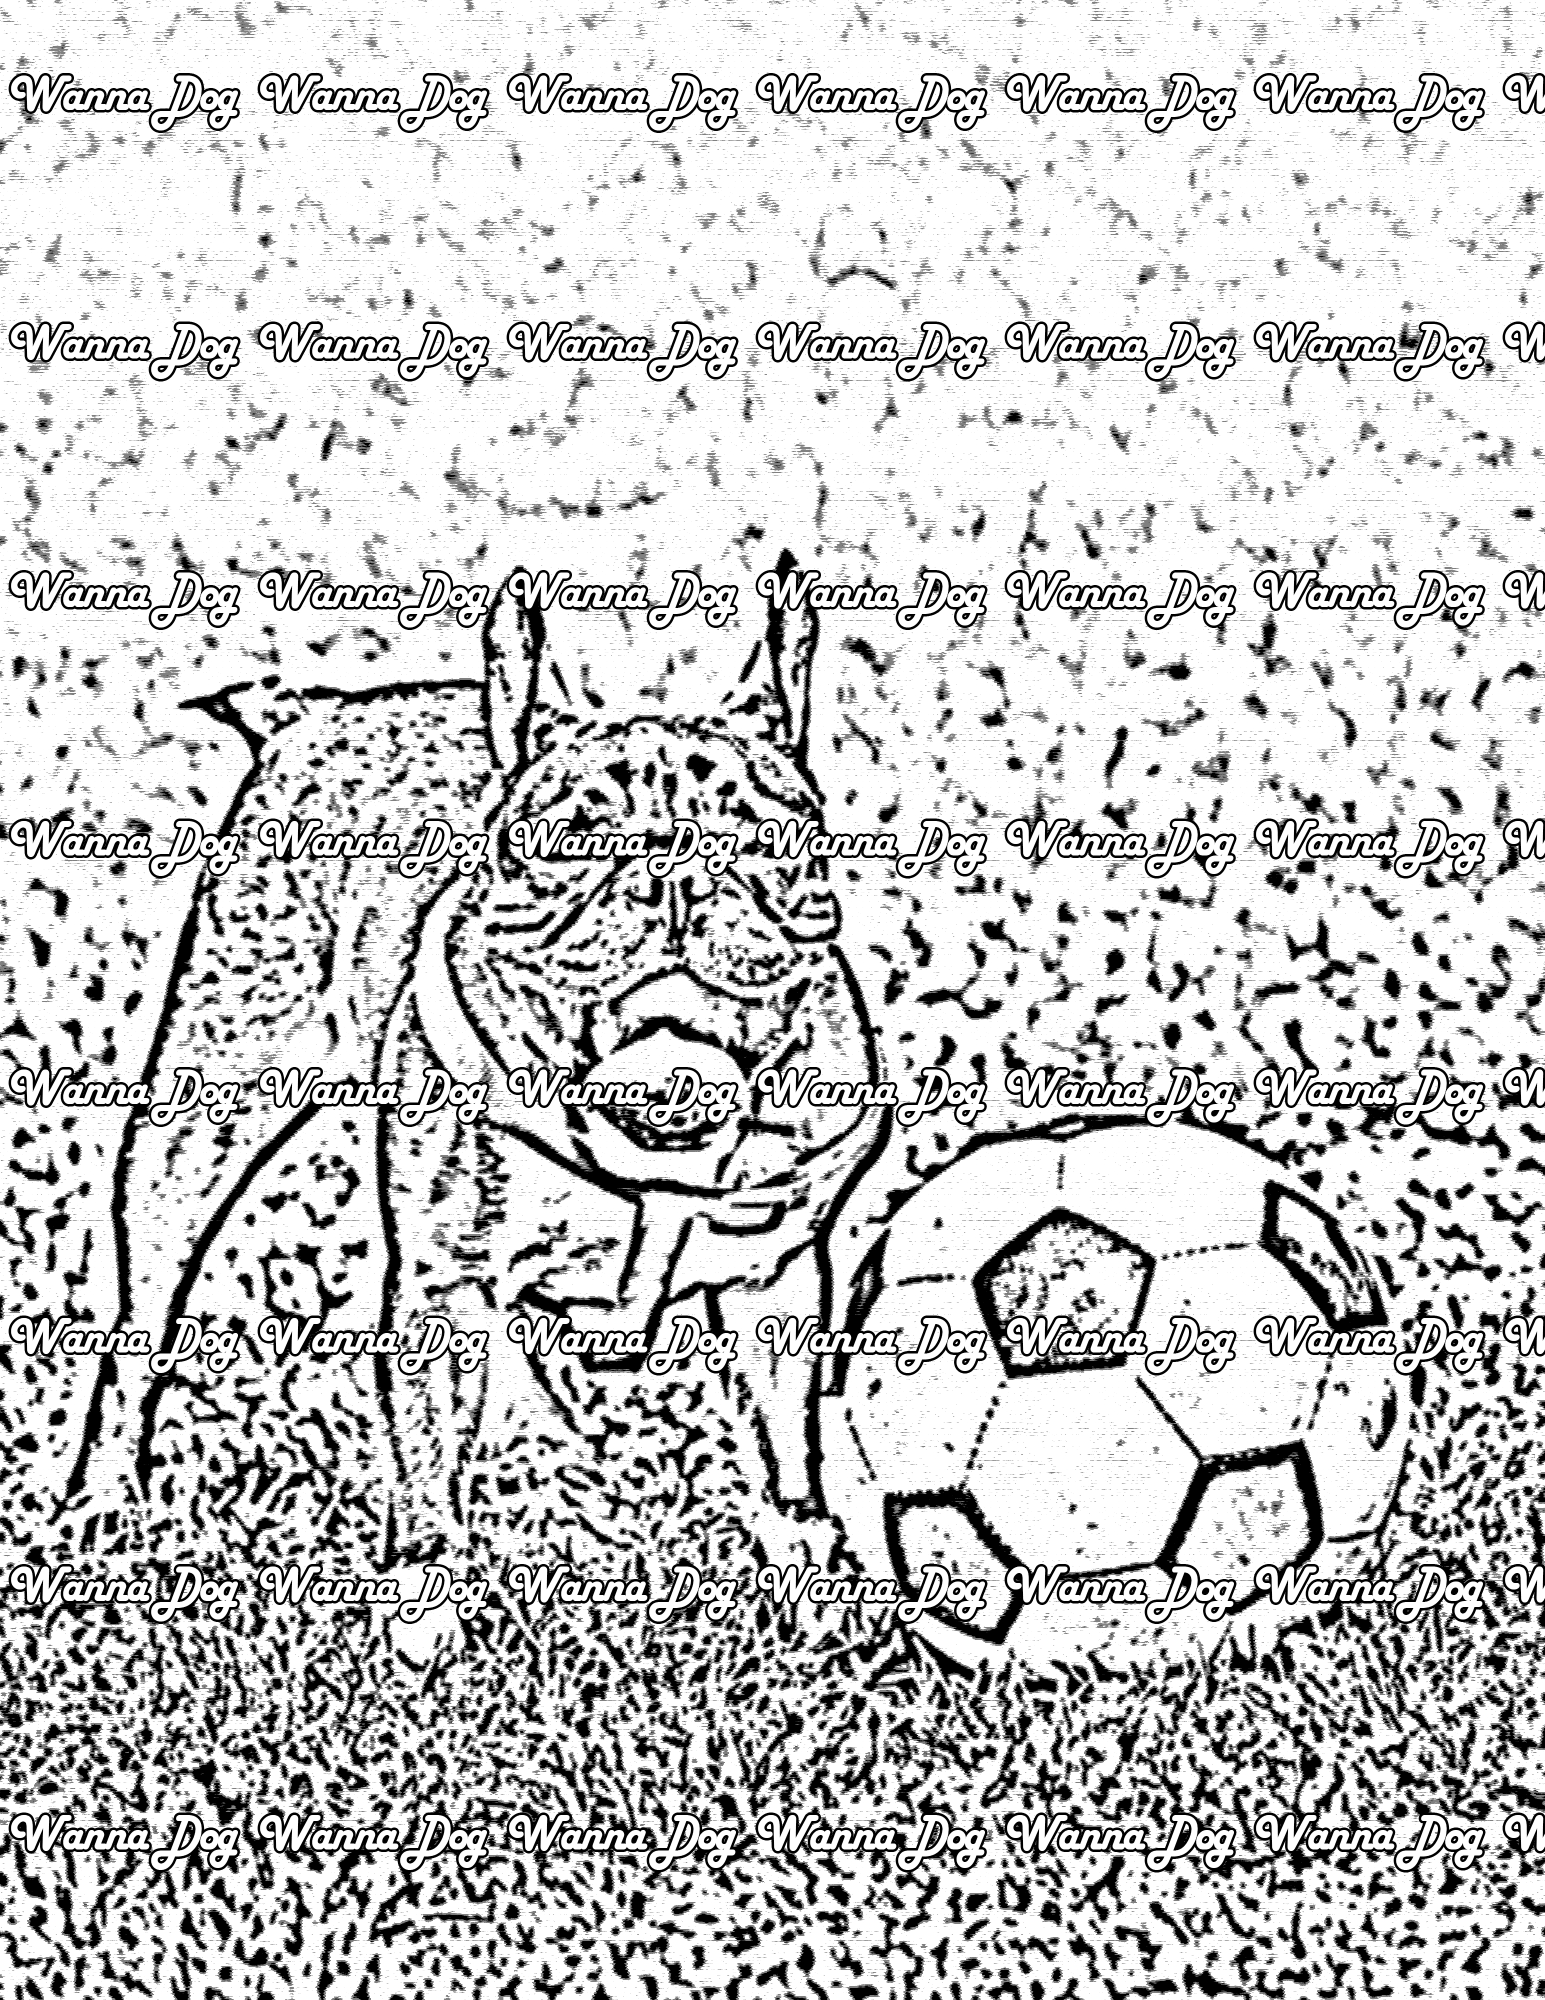 Boston Terrier Coloring Page of a Boston Terrier playing soccer